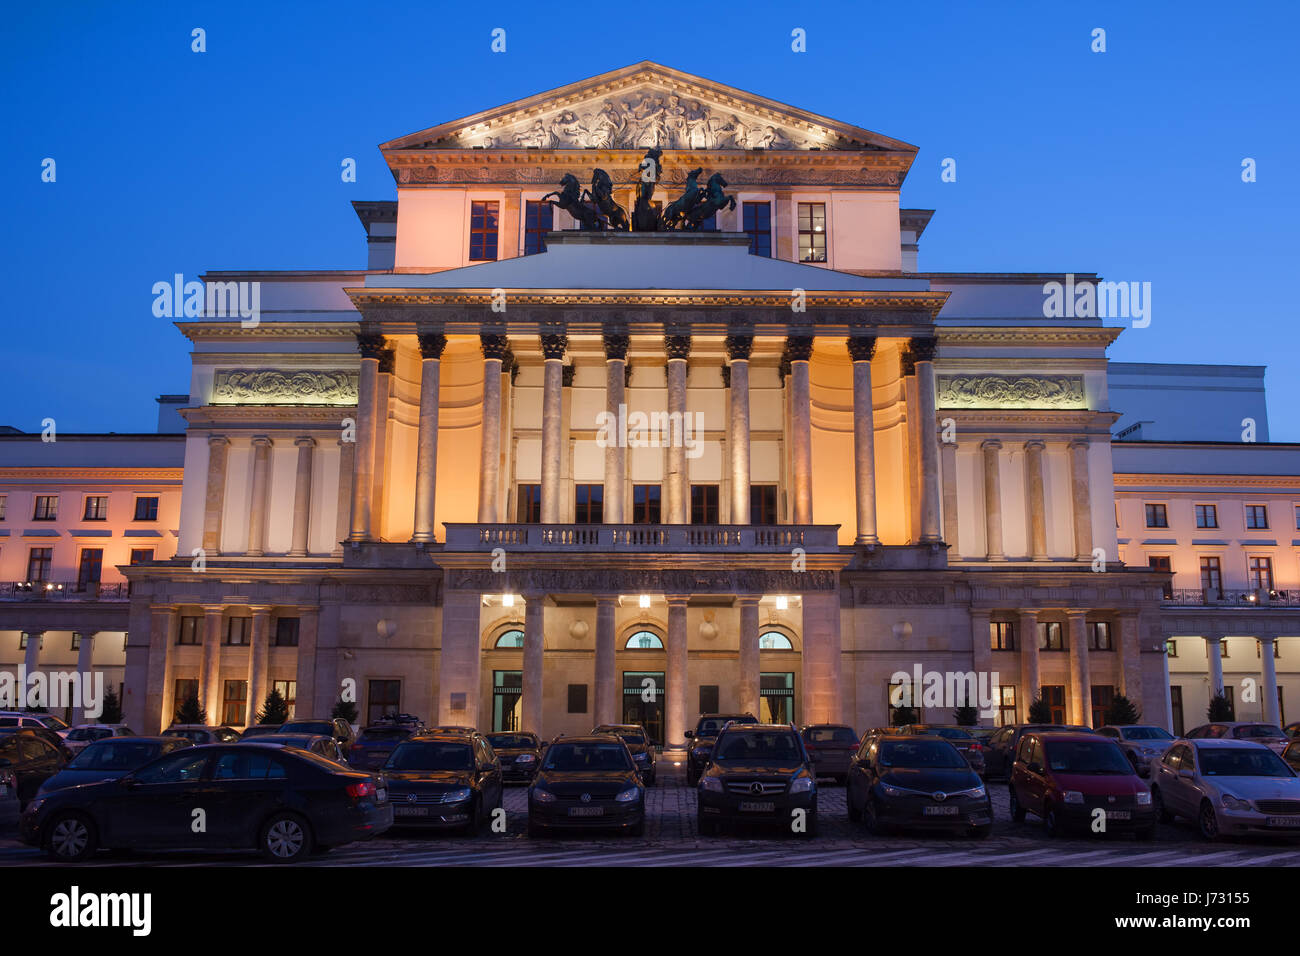 Poland, Warsaw, National Theatre (Teatr Narodowy) and Opera at night, classical style city landmark Stock Photo